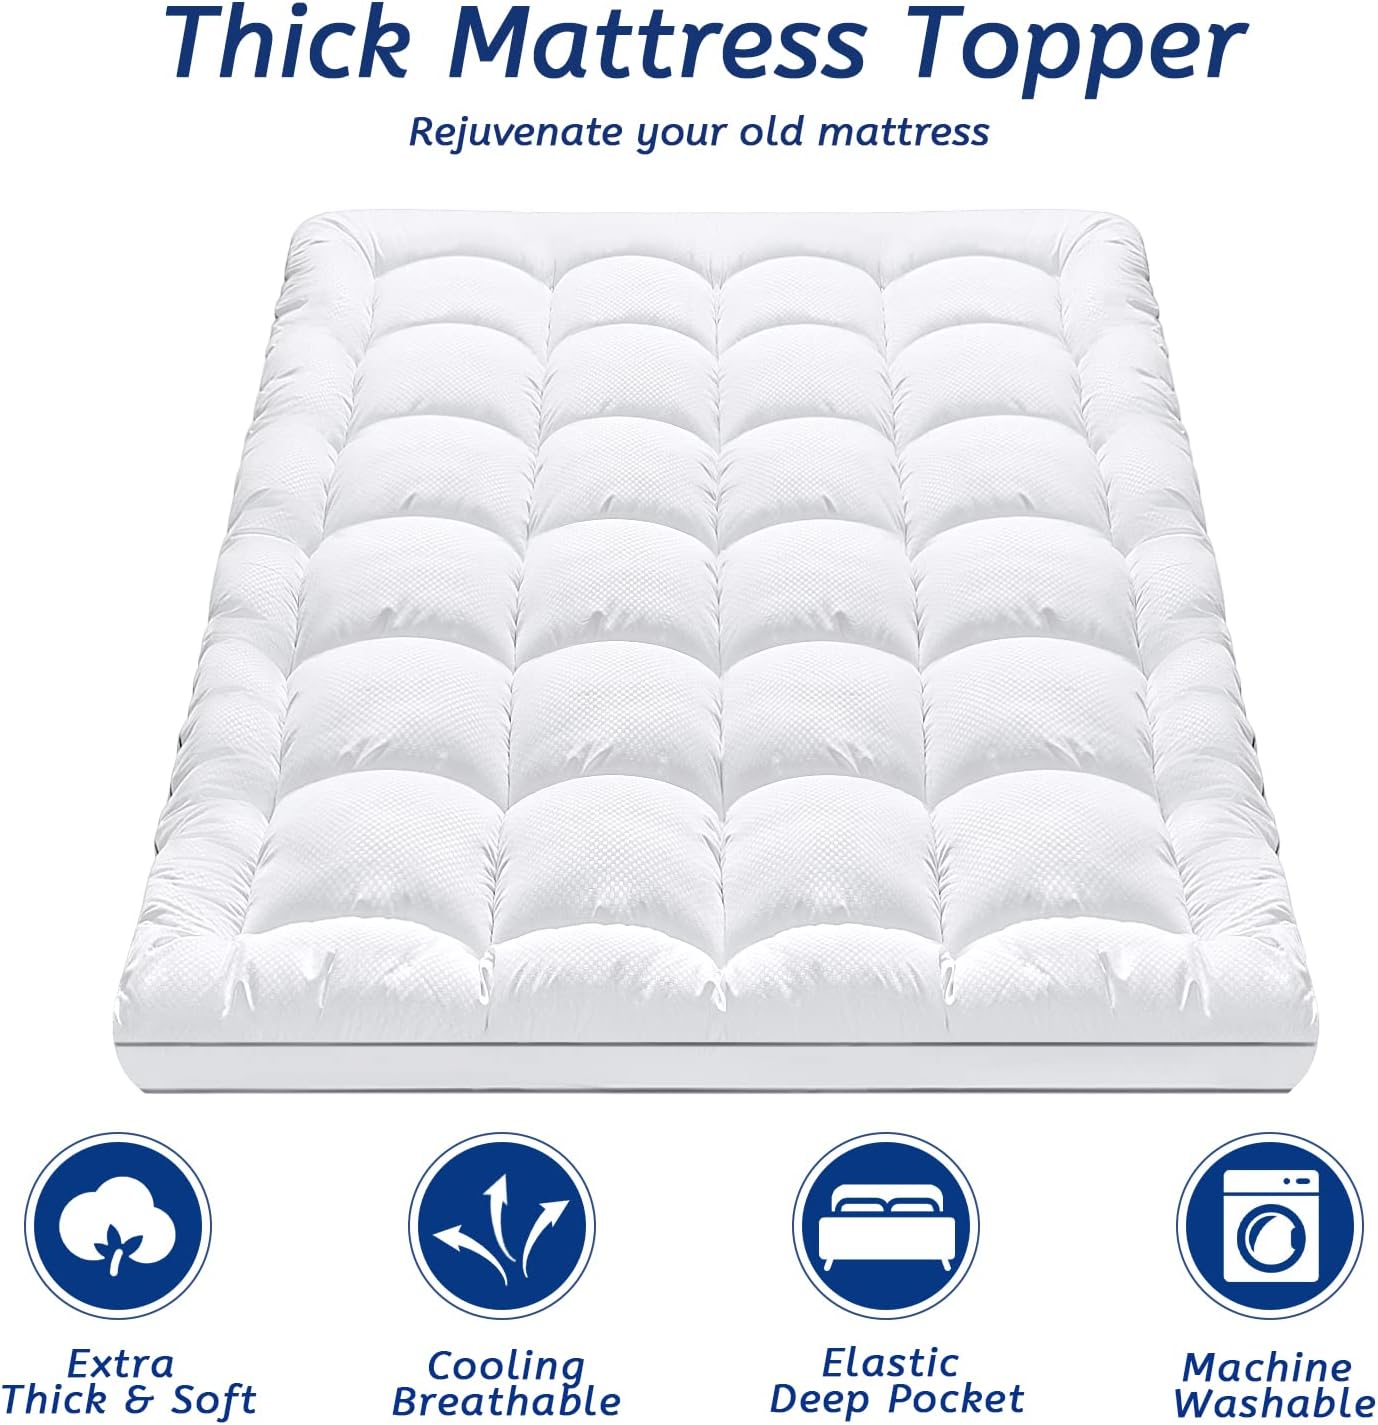 Full Size Mattress Topper for Back Pain, Cooling Extra Thick Mattress Pad Cover with 8-21 inch Deep Pocket, Plush Pillow Top Mattress Topper Overfilled with Down Alternative, Full Size, White (Full, White)